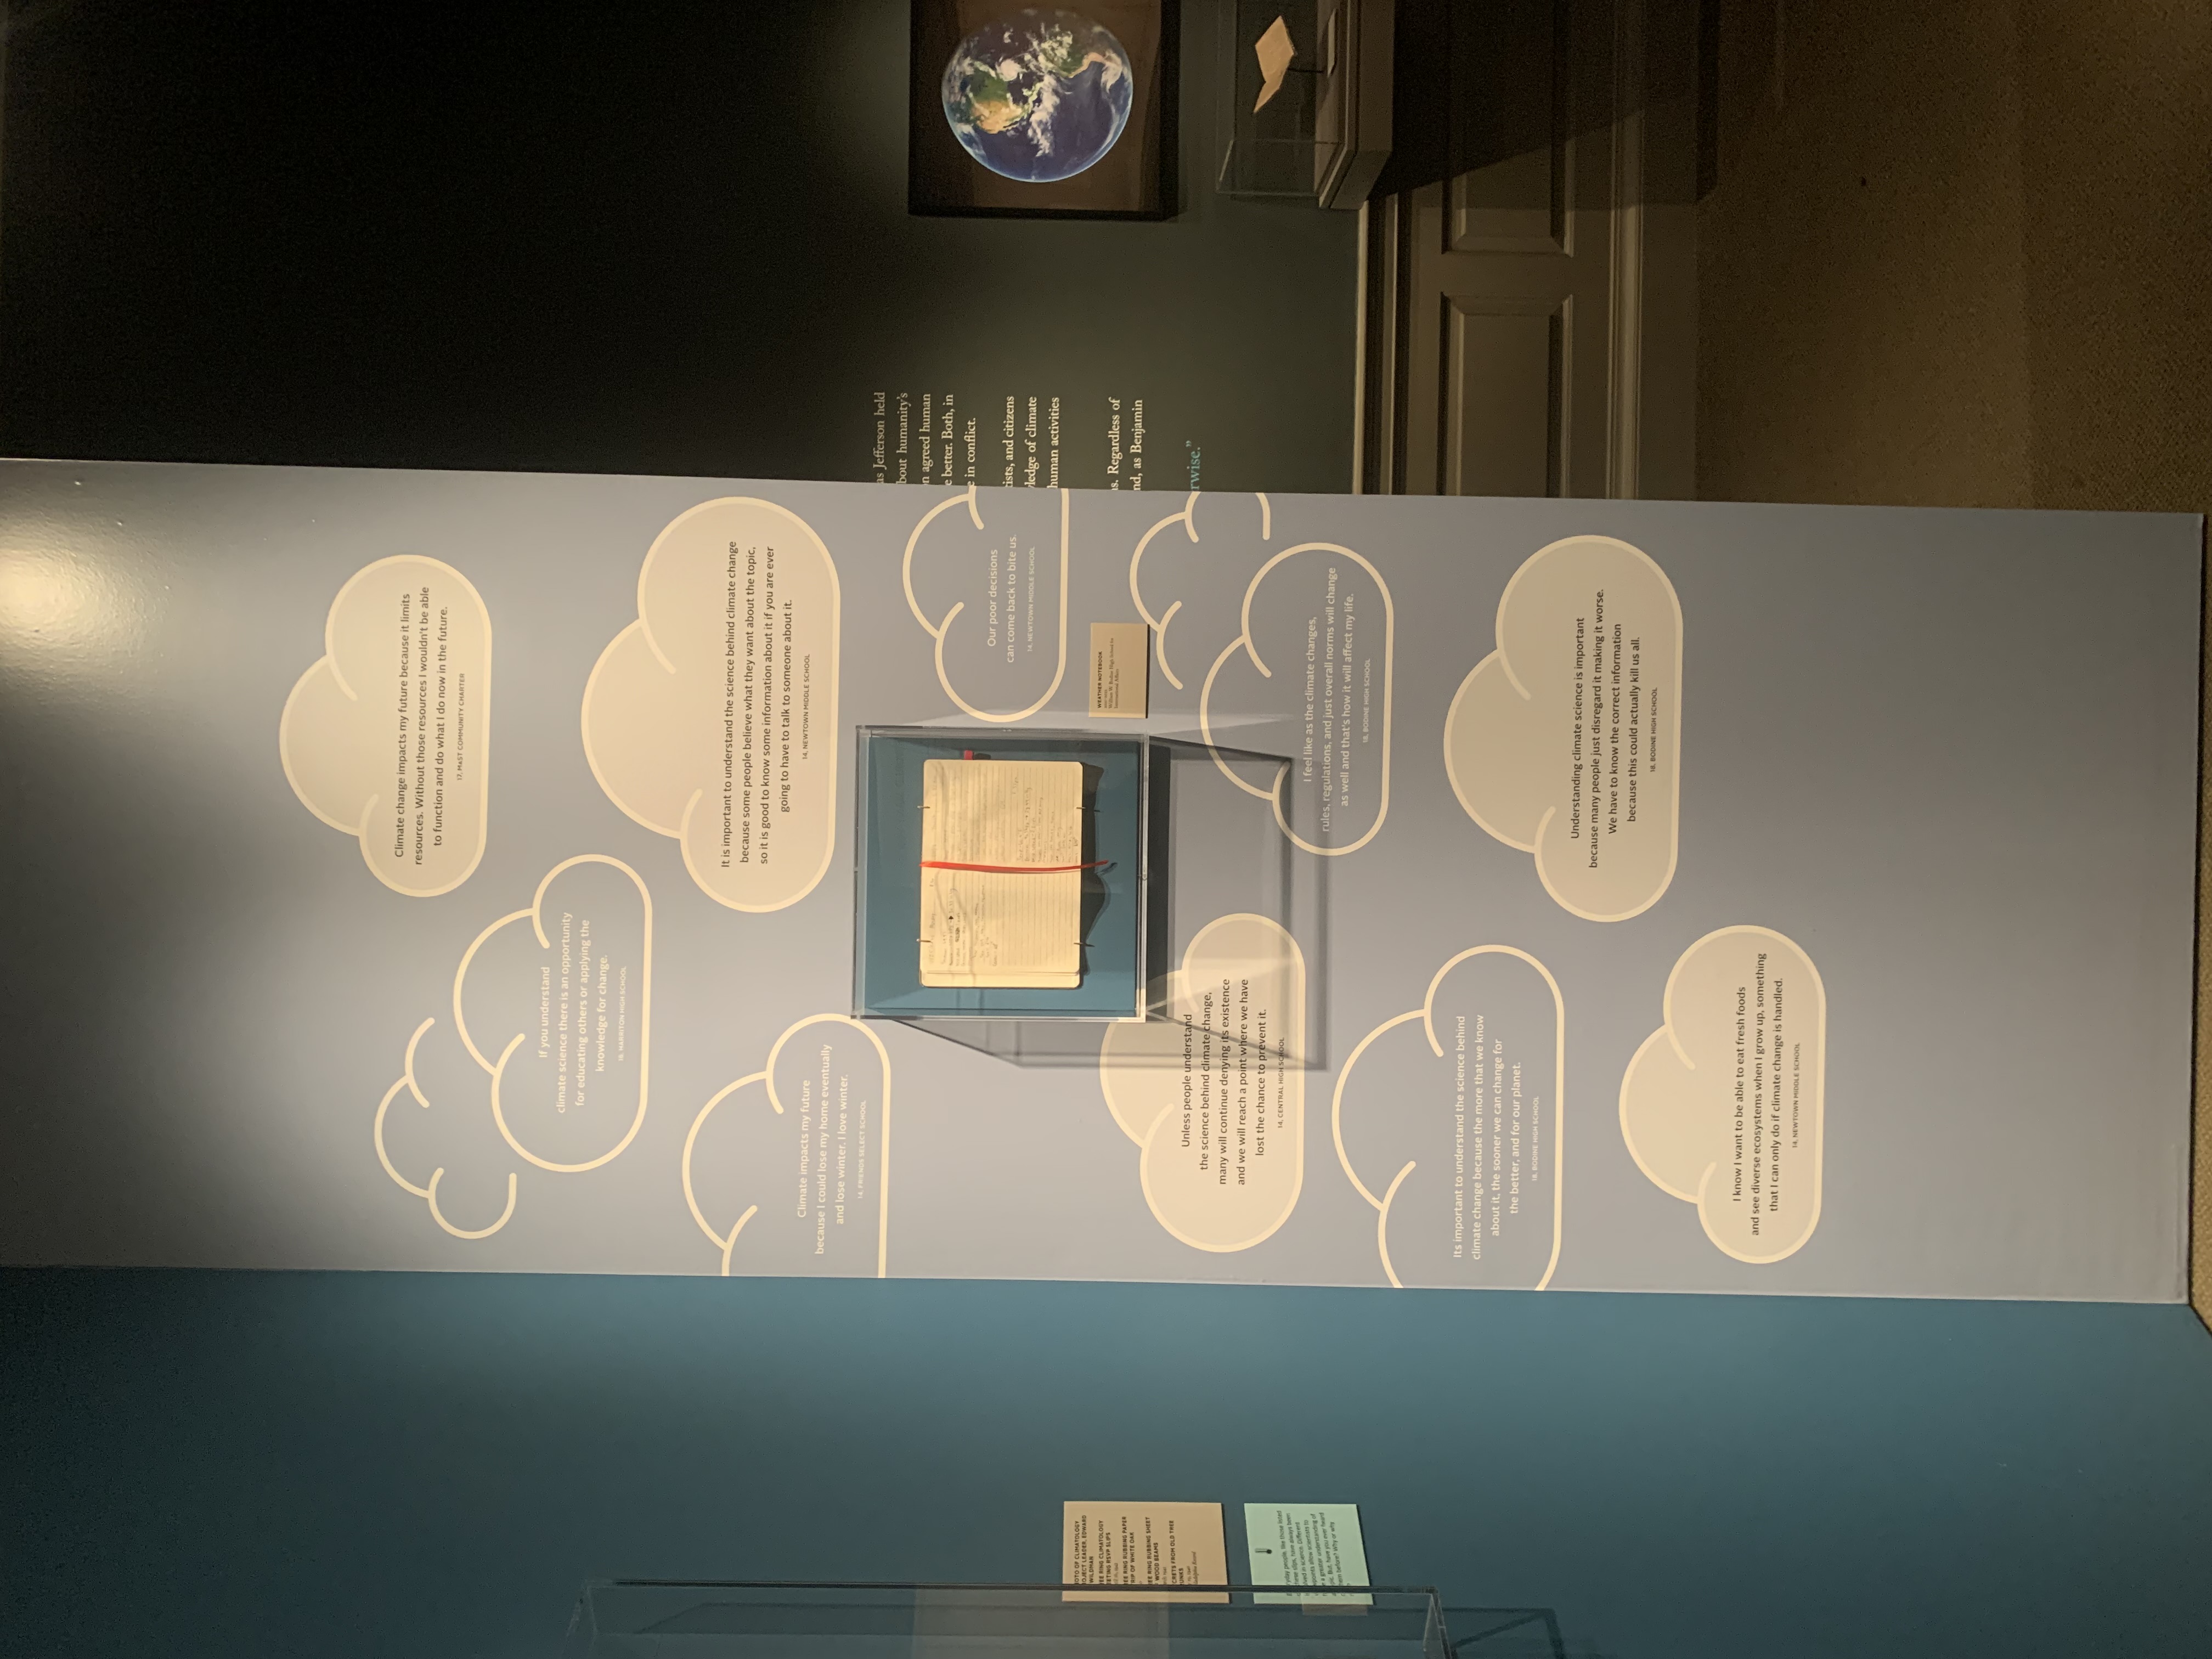 Photo of wall in exhibition that shows quotes and a journal from the Community Science Weather Data project